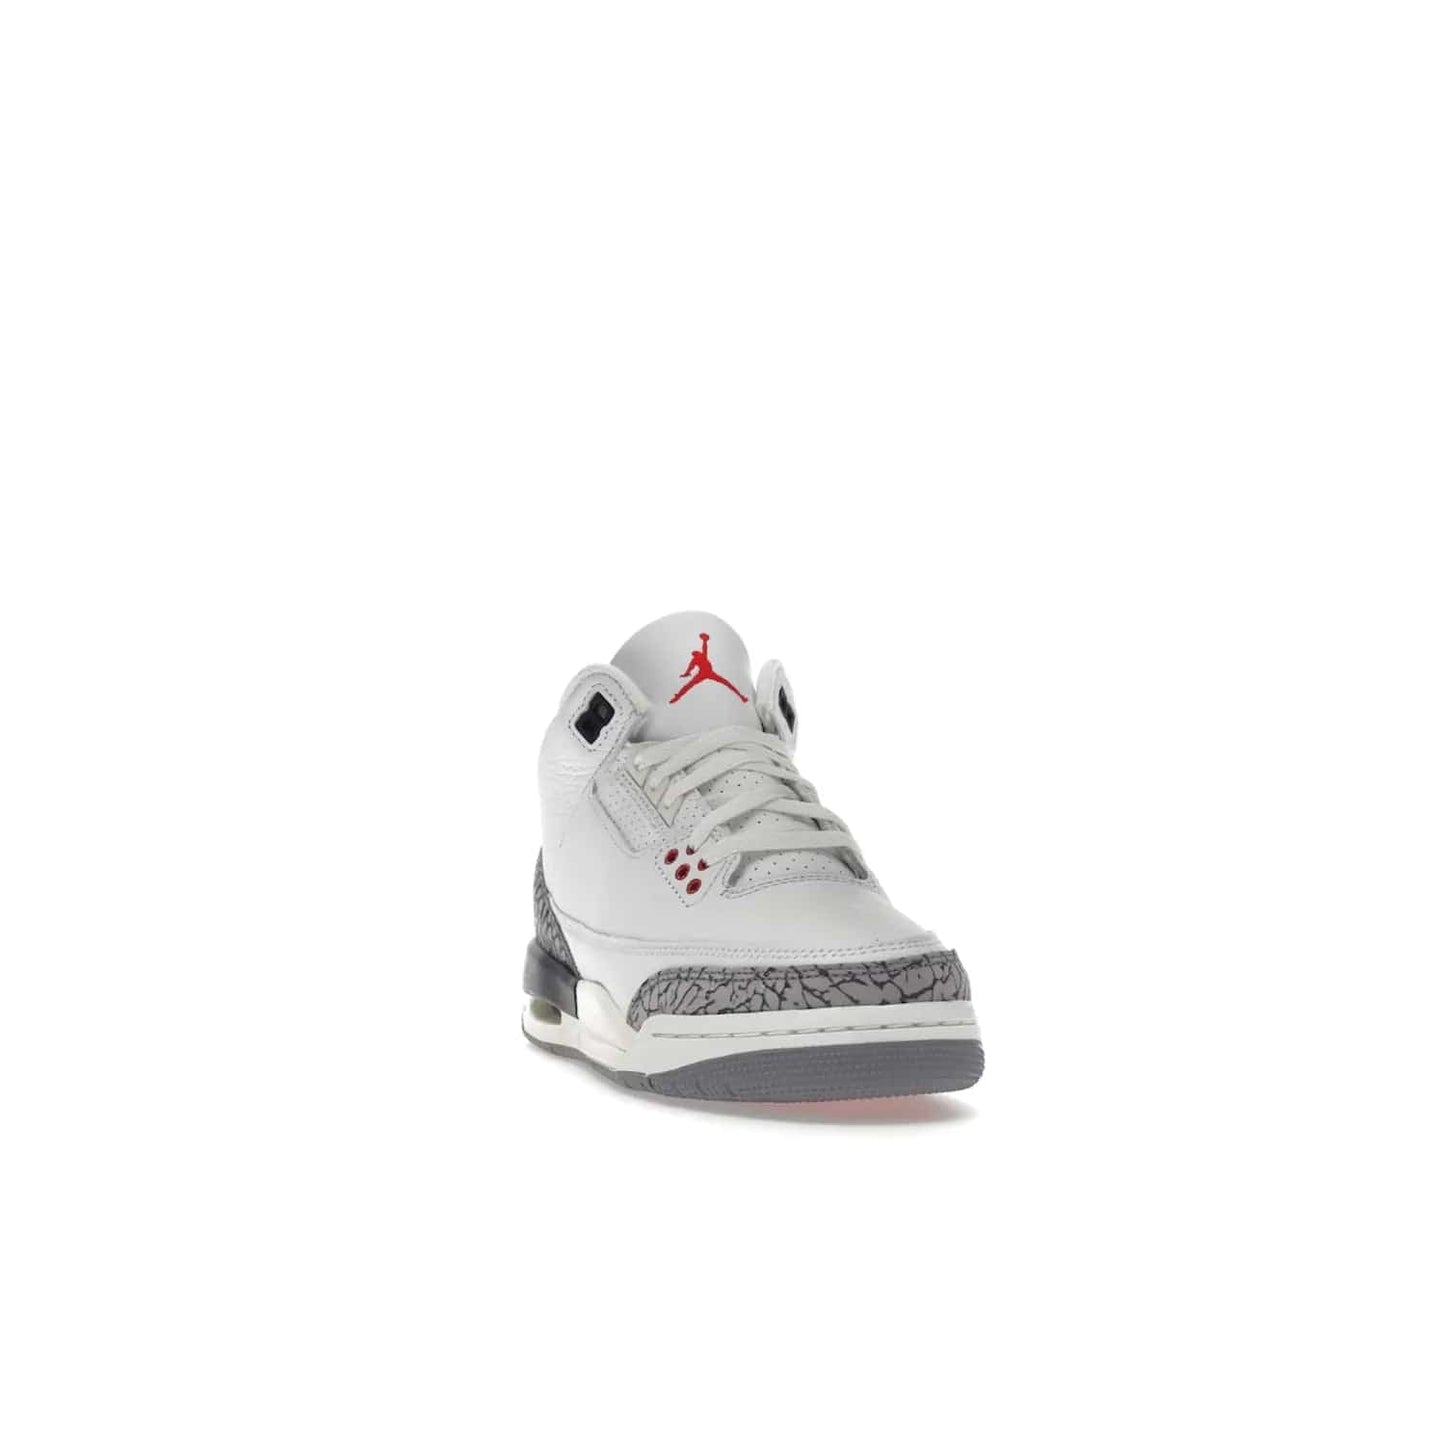 Jordan 3 Retro White Cement Reimagined (GS) - Image 8 - Only at www.BallersClubKickz.com - Grab the perfect blend of modern design and classic style with the Jordan 3 Retro White Cement Reimagined (GS). Features Summit White, Fire Red, Black, and Cement Grey colorway, iconic Jordan logo embroidered on the tongue, and “Nike Air” branding. Limited availability, get your pair before March 11th 2023.